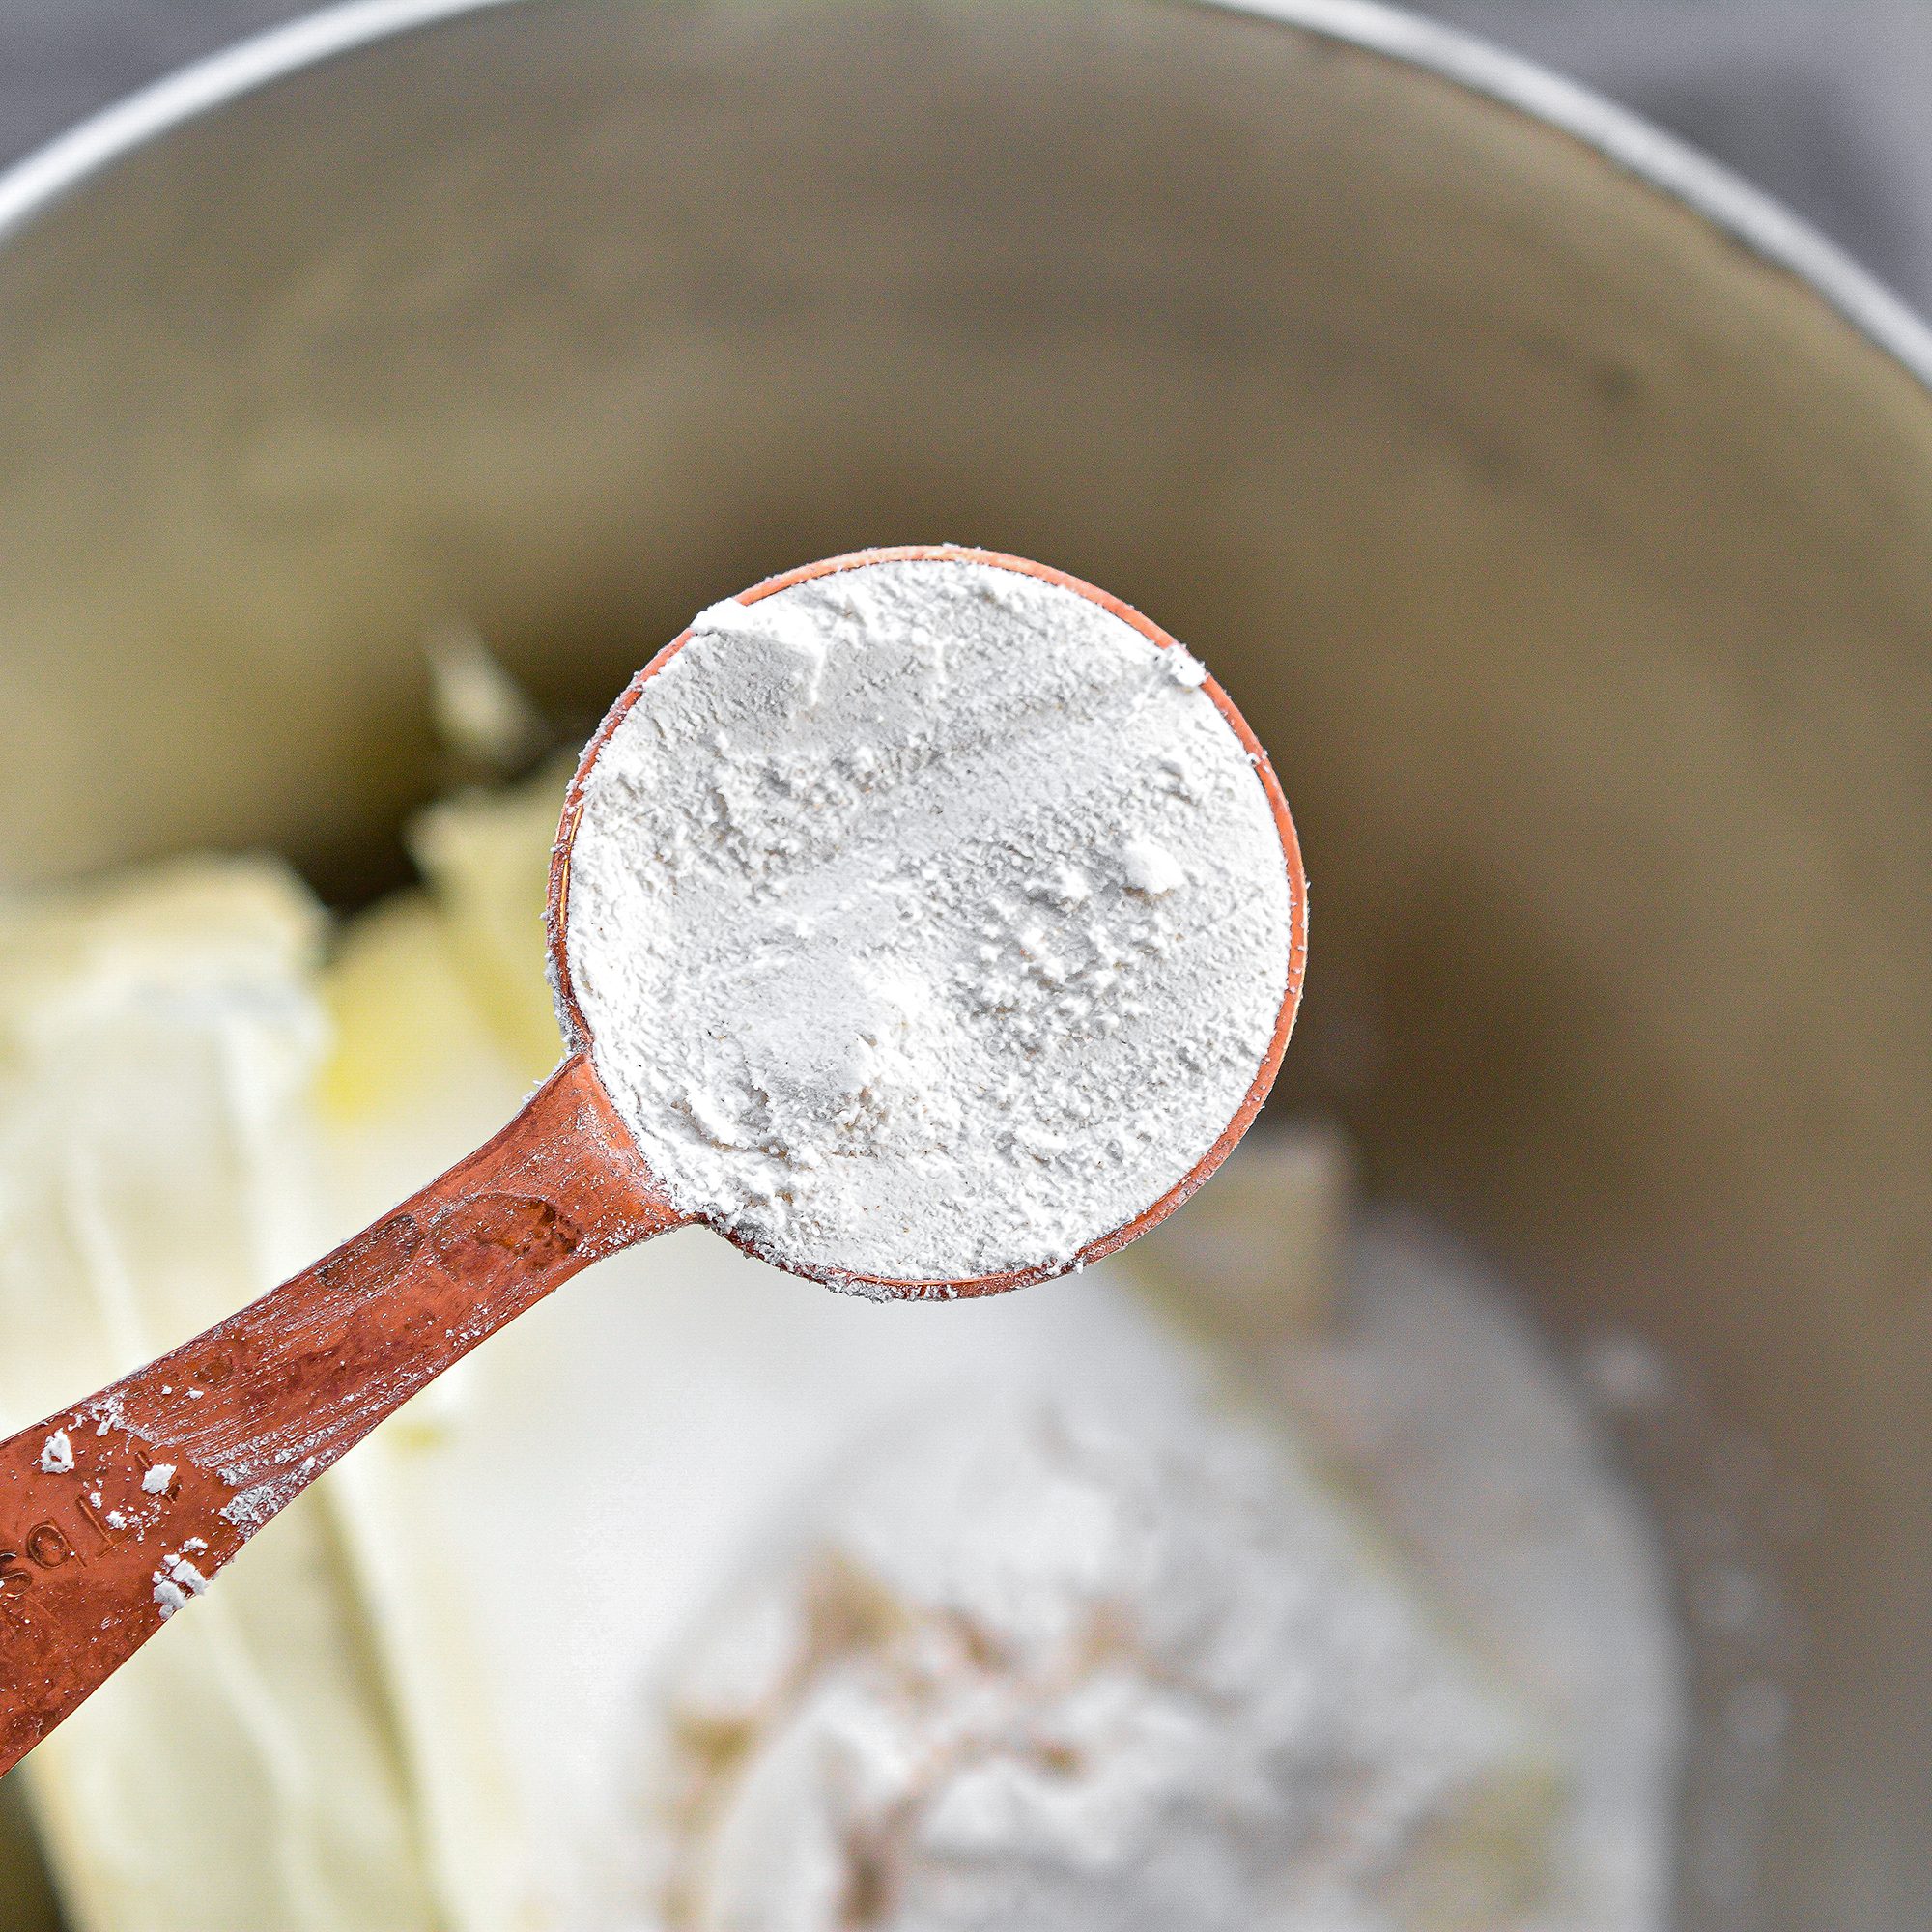 In a mixing bowl, combine the 24 oz cream cheese, 1 cup sugar, and 3 Tbsp flour. Mix until smooth and creamy.